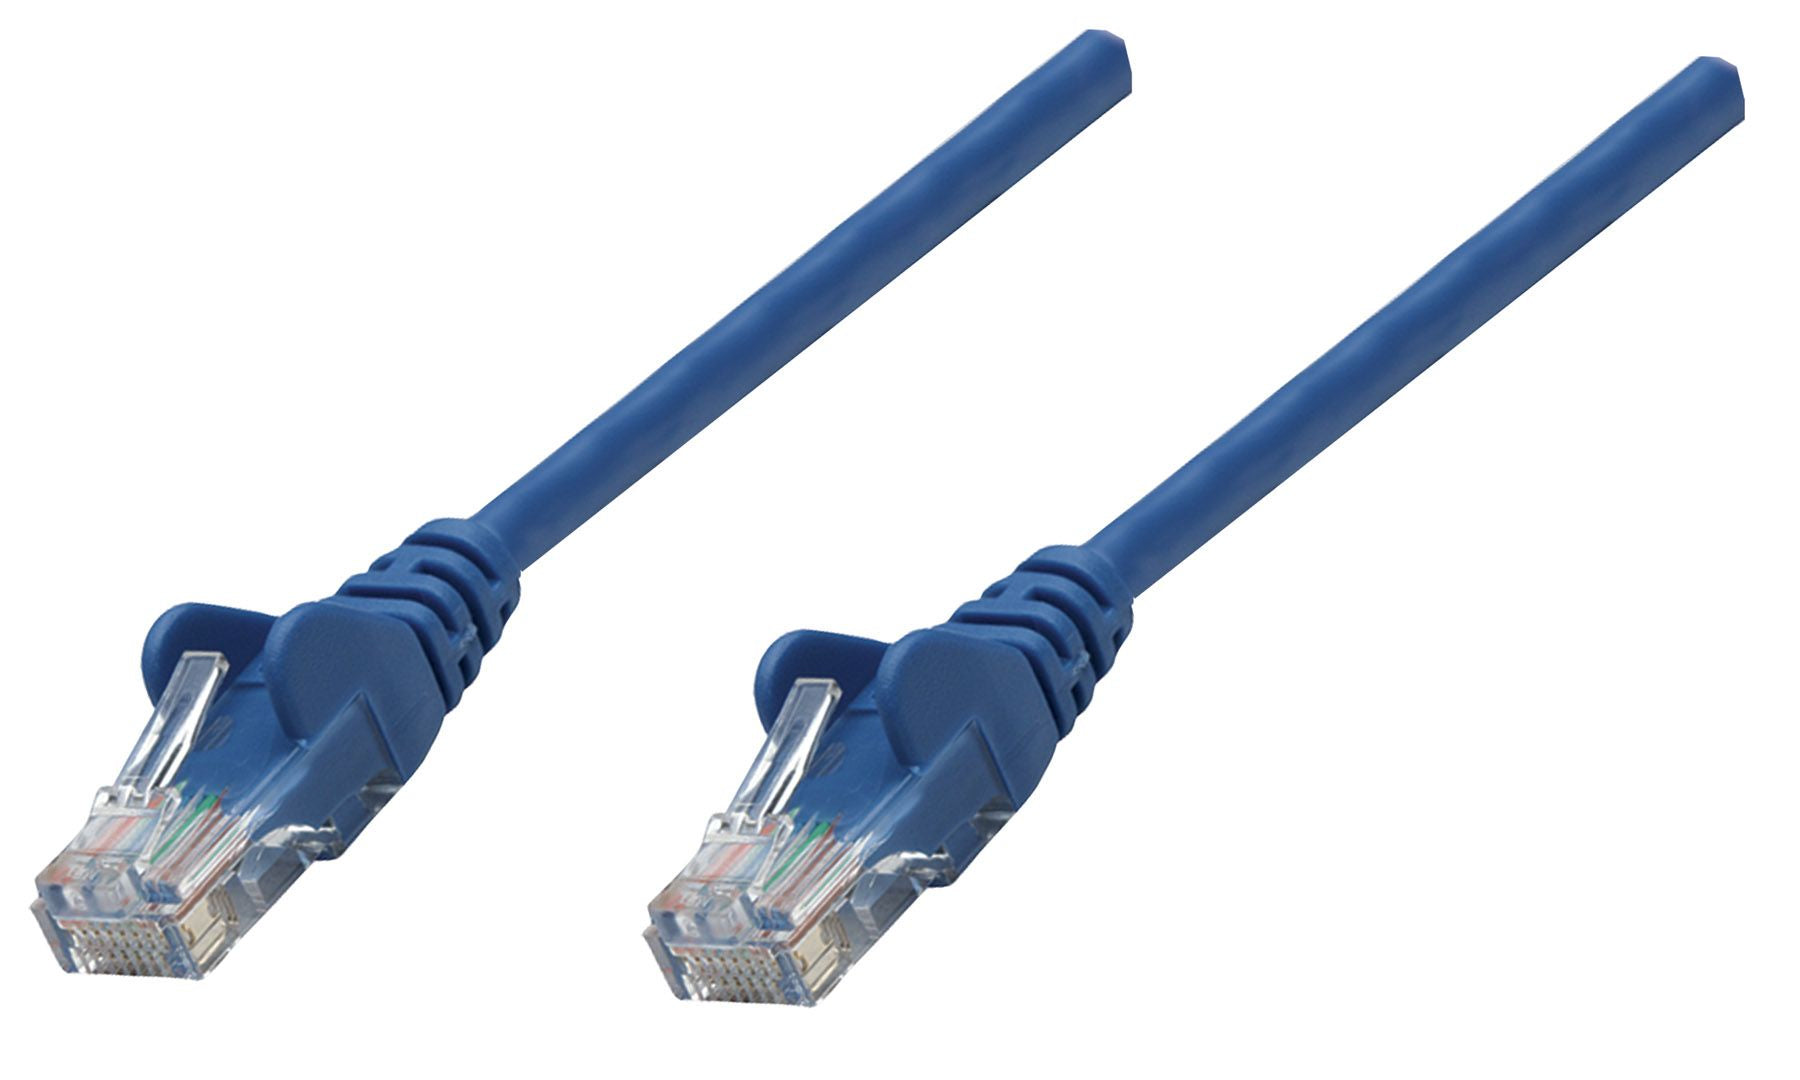 Cable Patch Intellinet Cat 6A, 3 Mts (10.0F) S/Ftp Azul (741491)